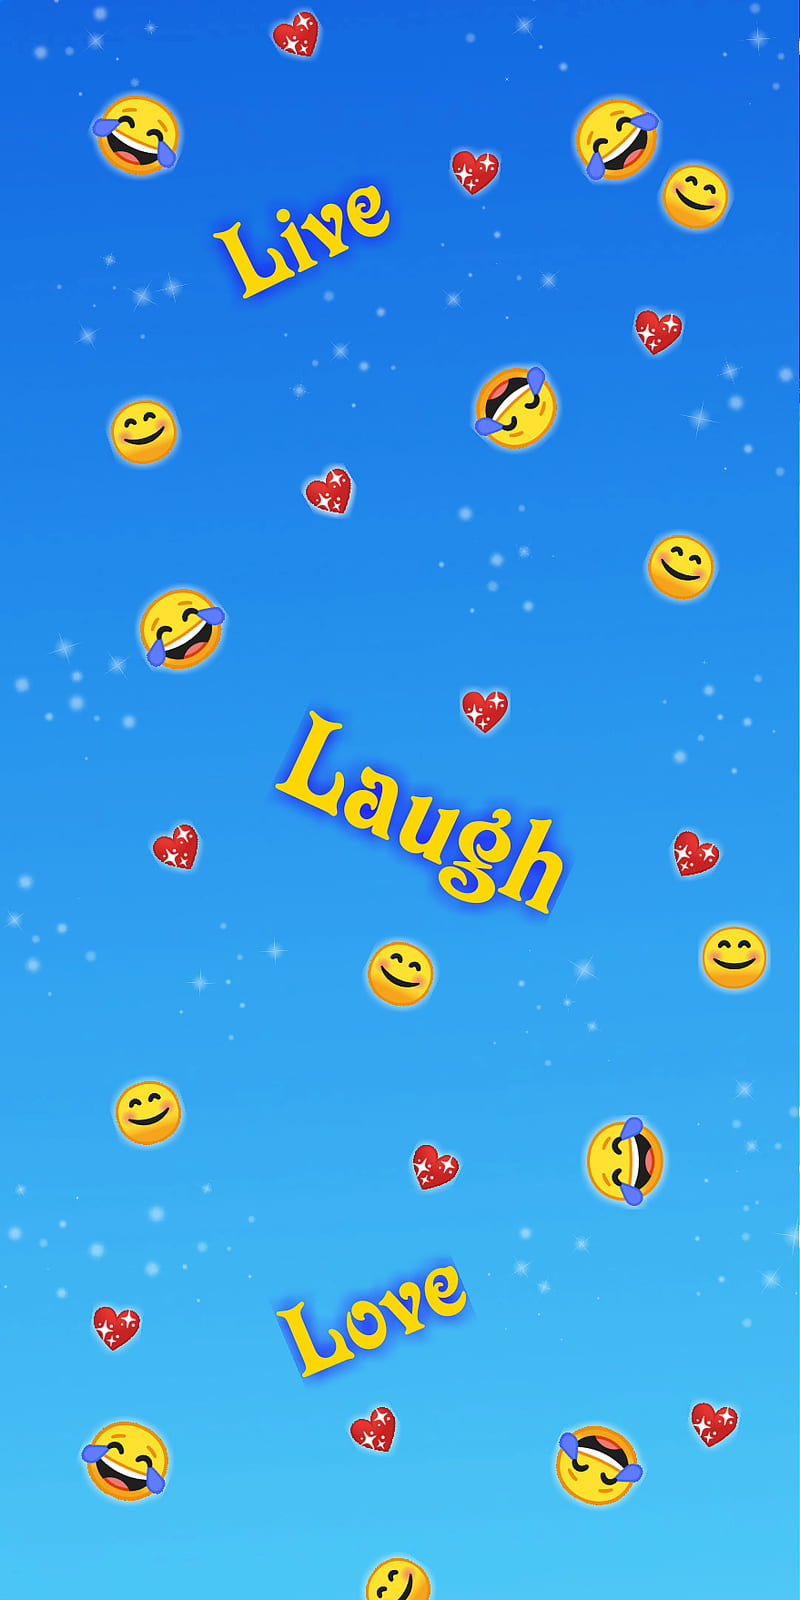 Emoticons over Blue Background  Free Stock Photo